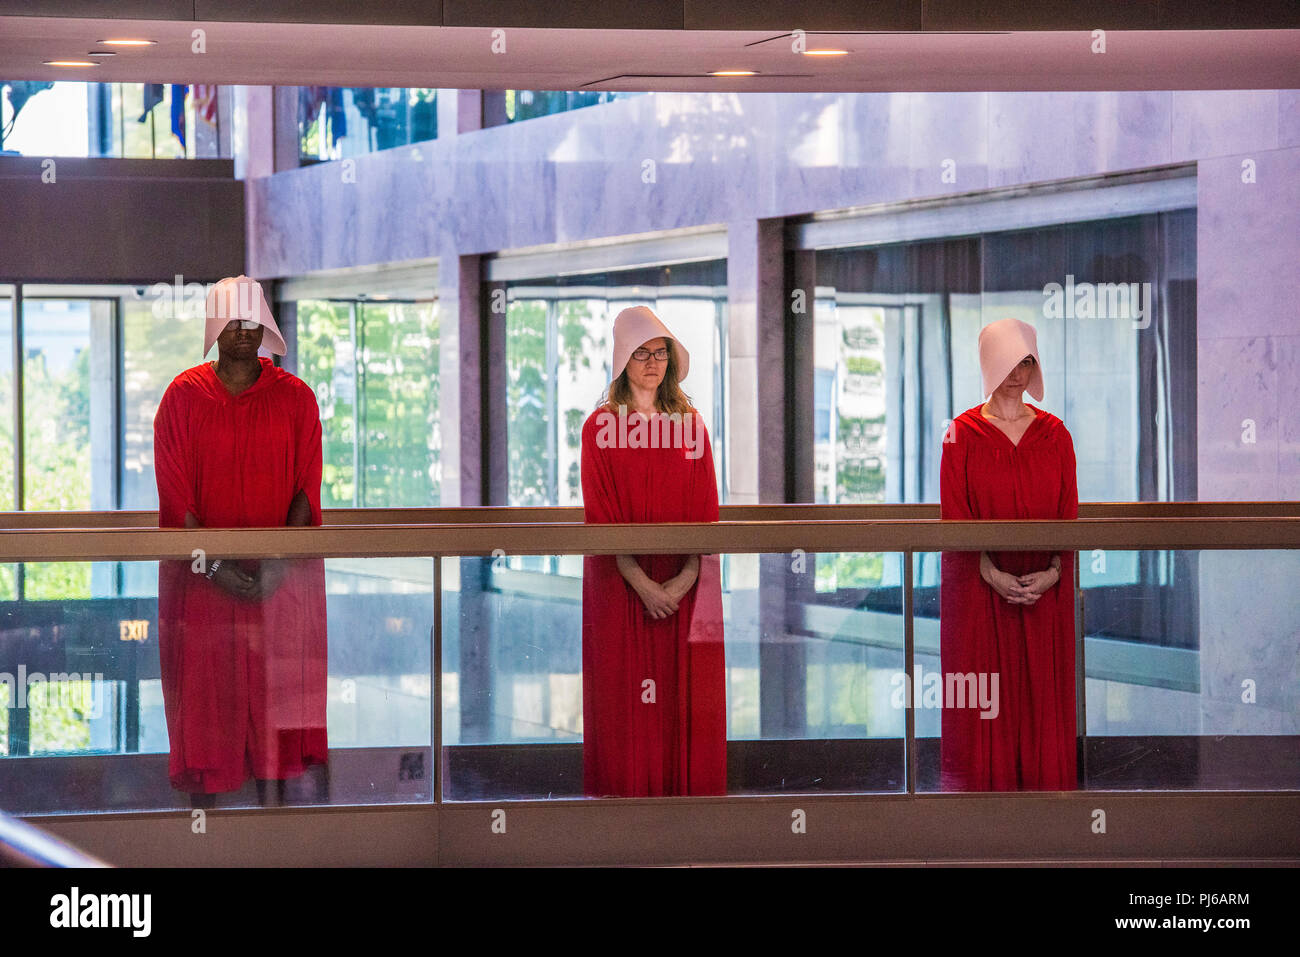 Washington DC, USA. 4th September 2018. Protestors hold a vigil while Judge Brett Kavanaugh attends his confirmation hearing to become the next Supreme Court Justice on Capitol Hill in Washington DC.   Patsy Lynch/Alamy Credit: Patsy Lynch/Alamy Live News Stock Photo